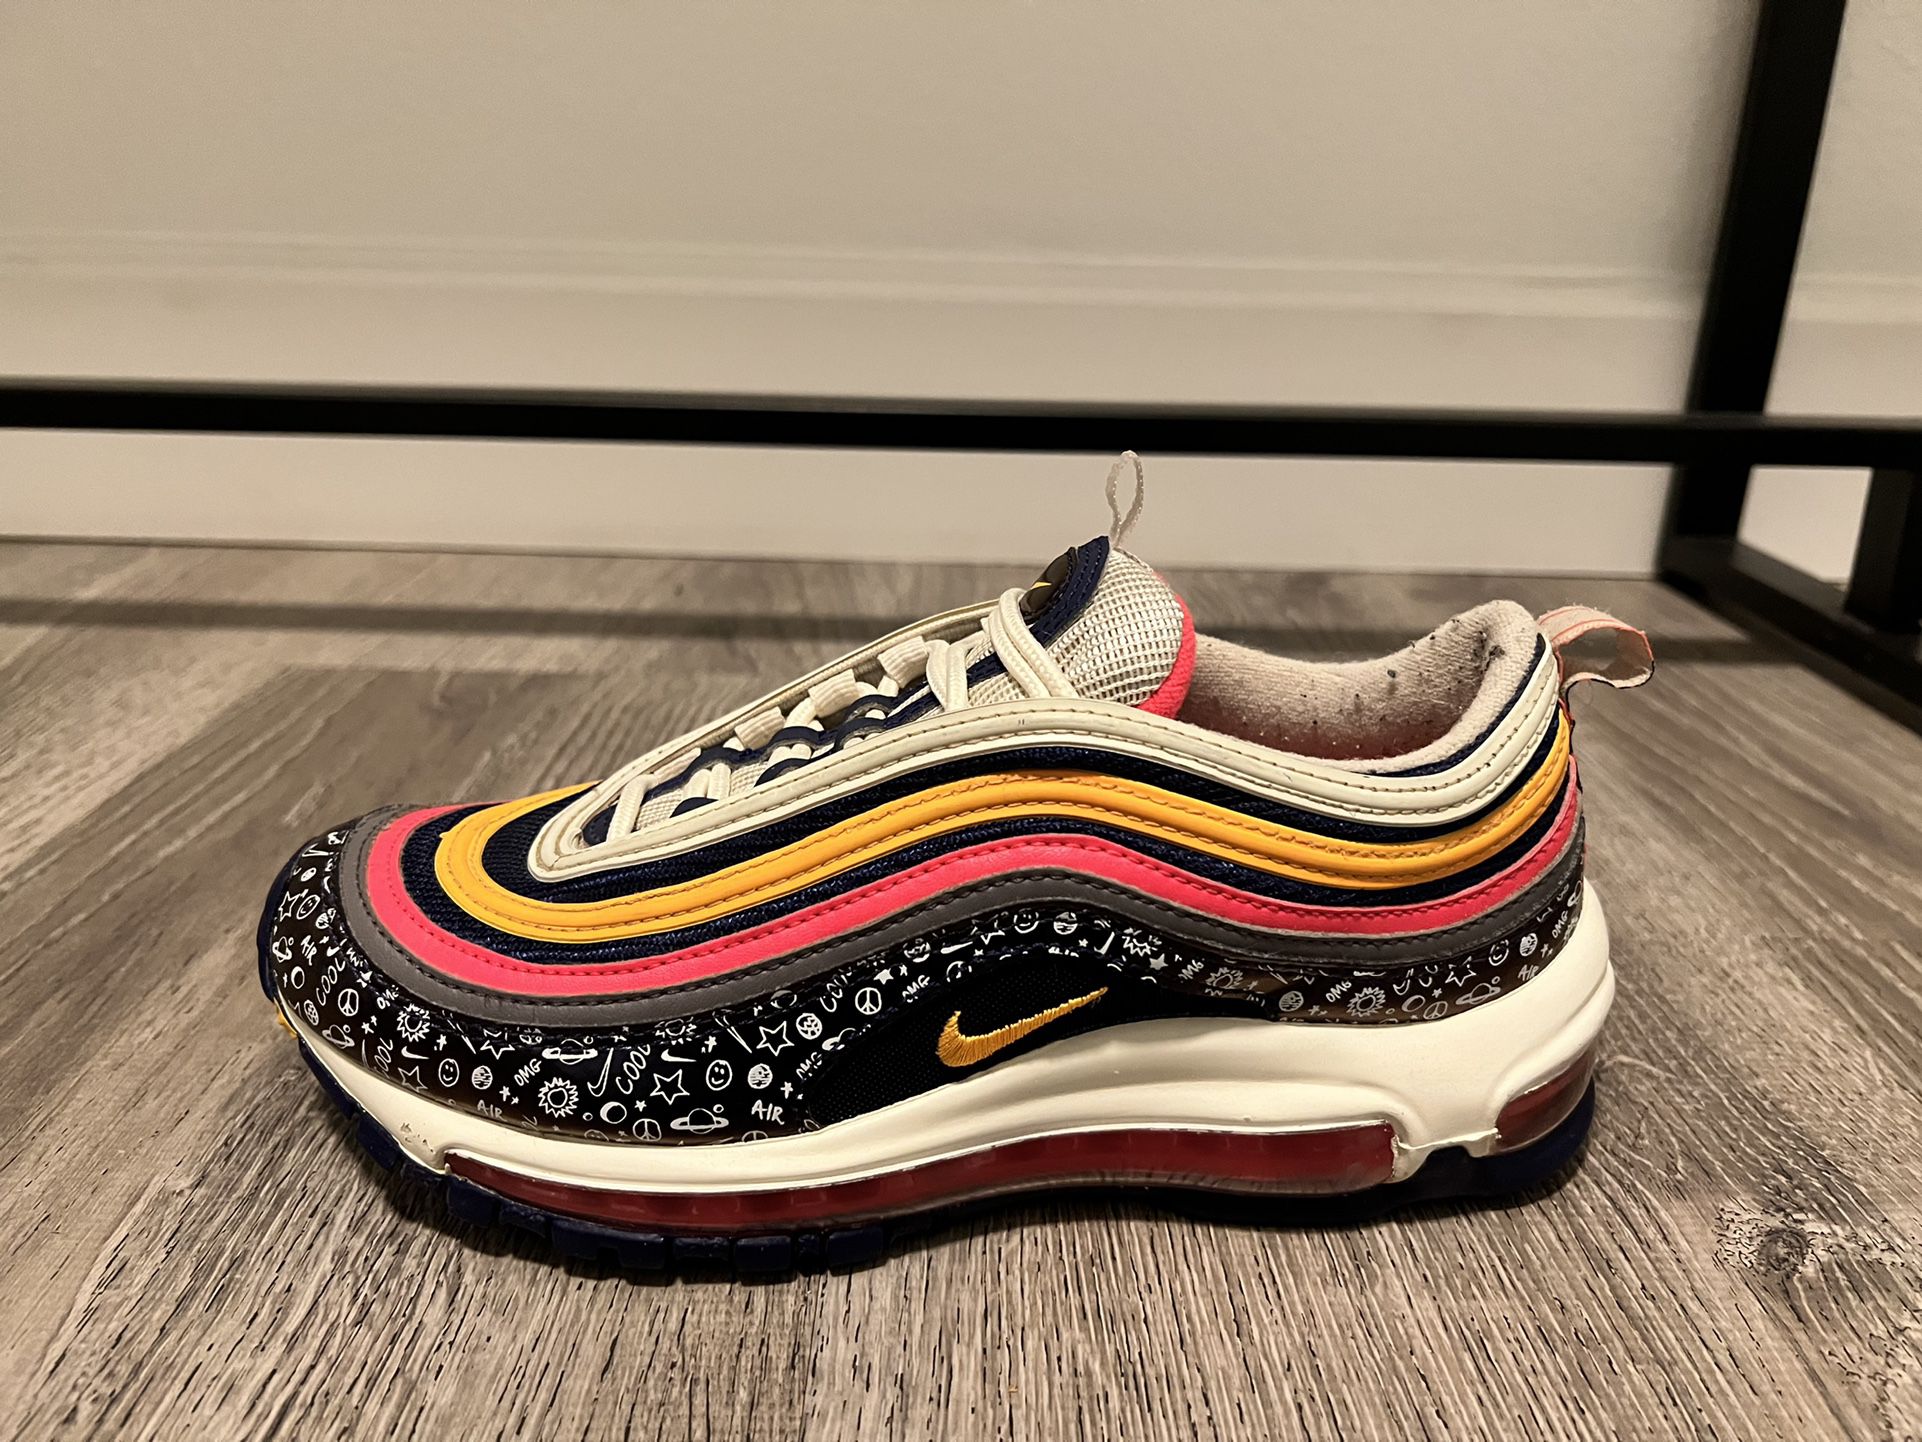 tong Blauwe plek Opblazen Nike Air Max 97 for Sale in Albuquerque, NM - OfferUp